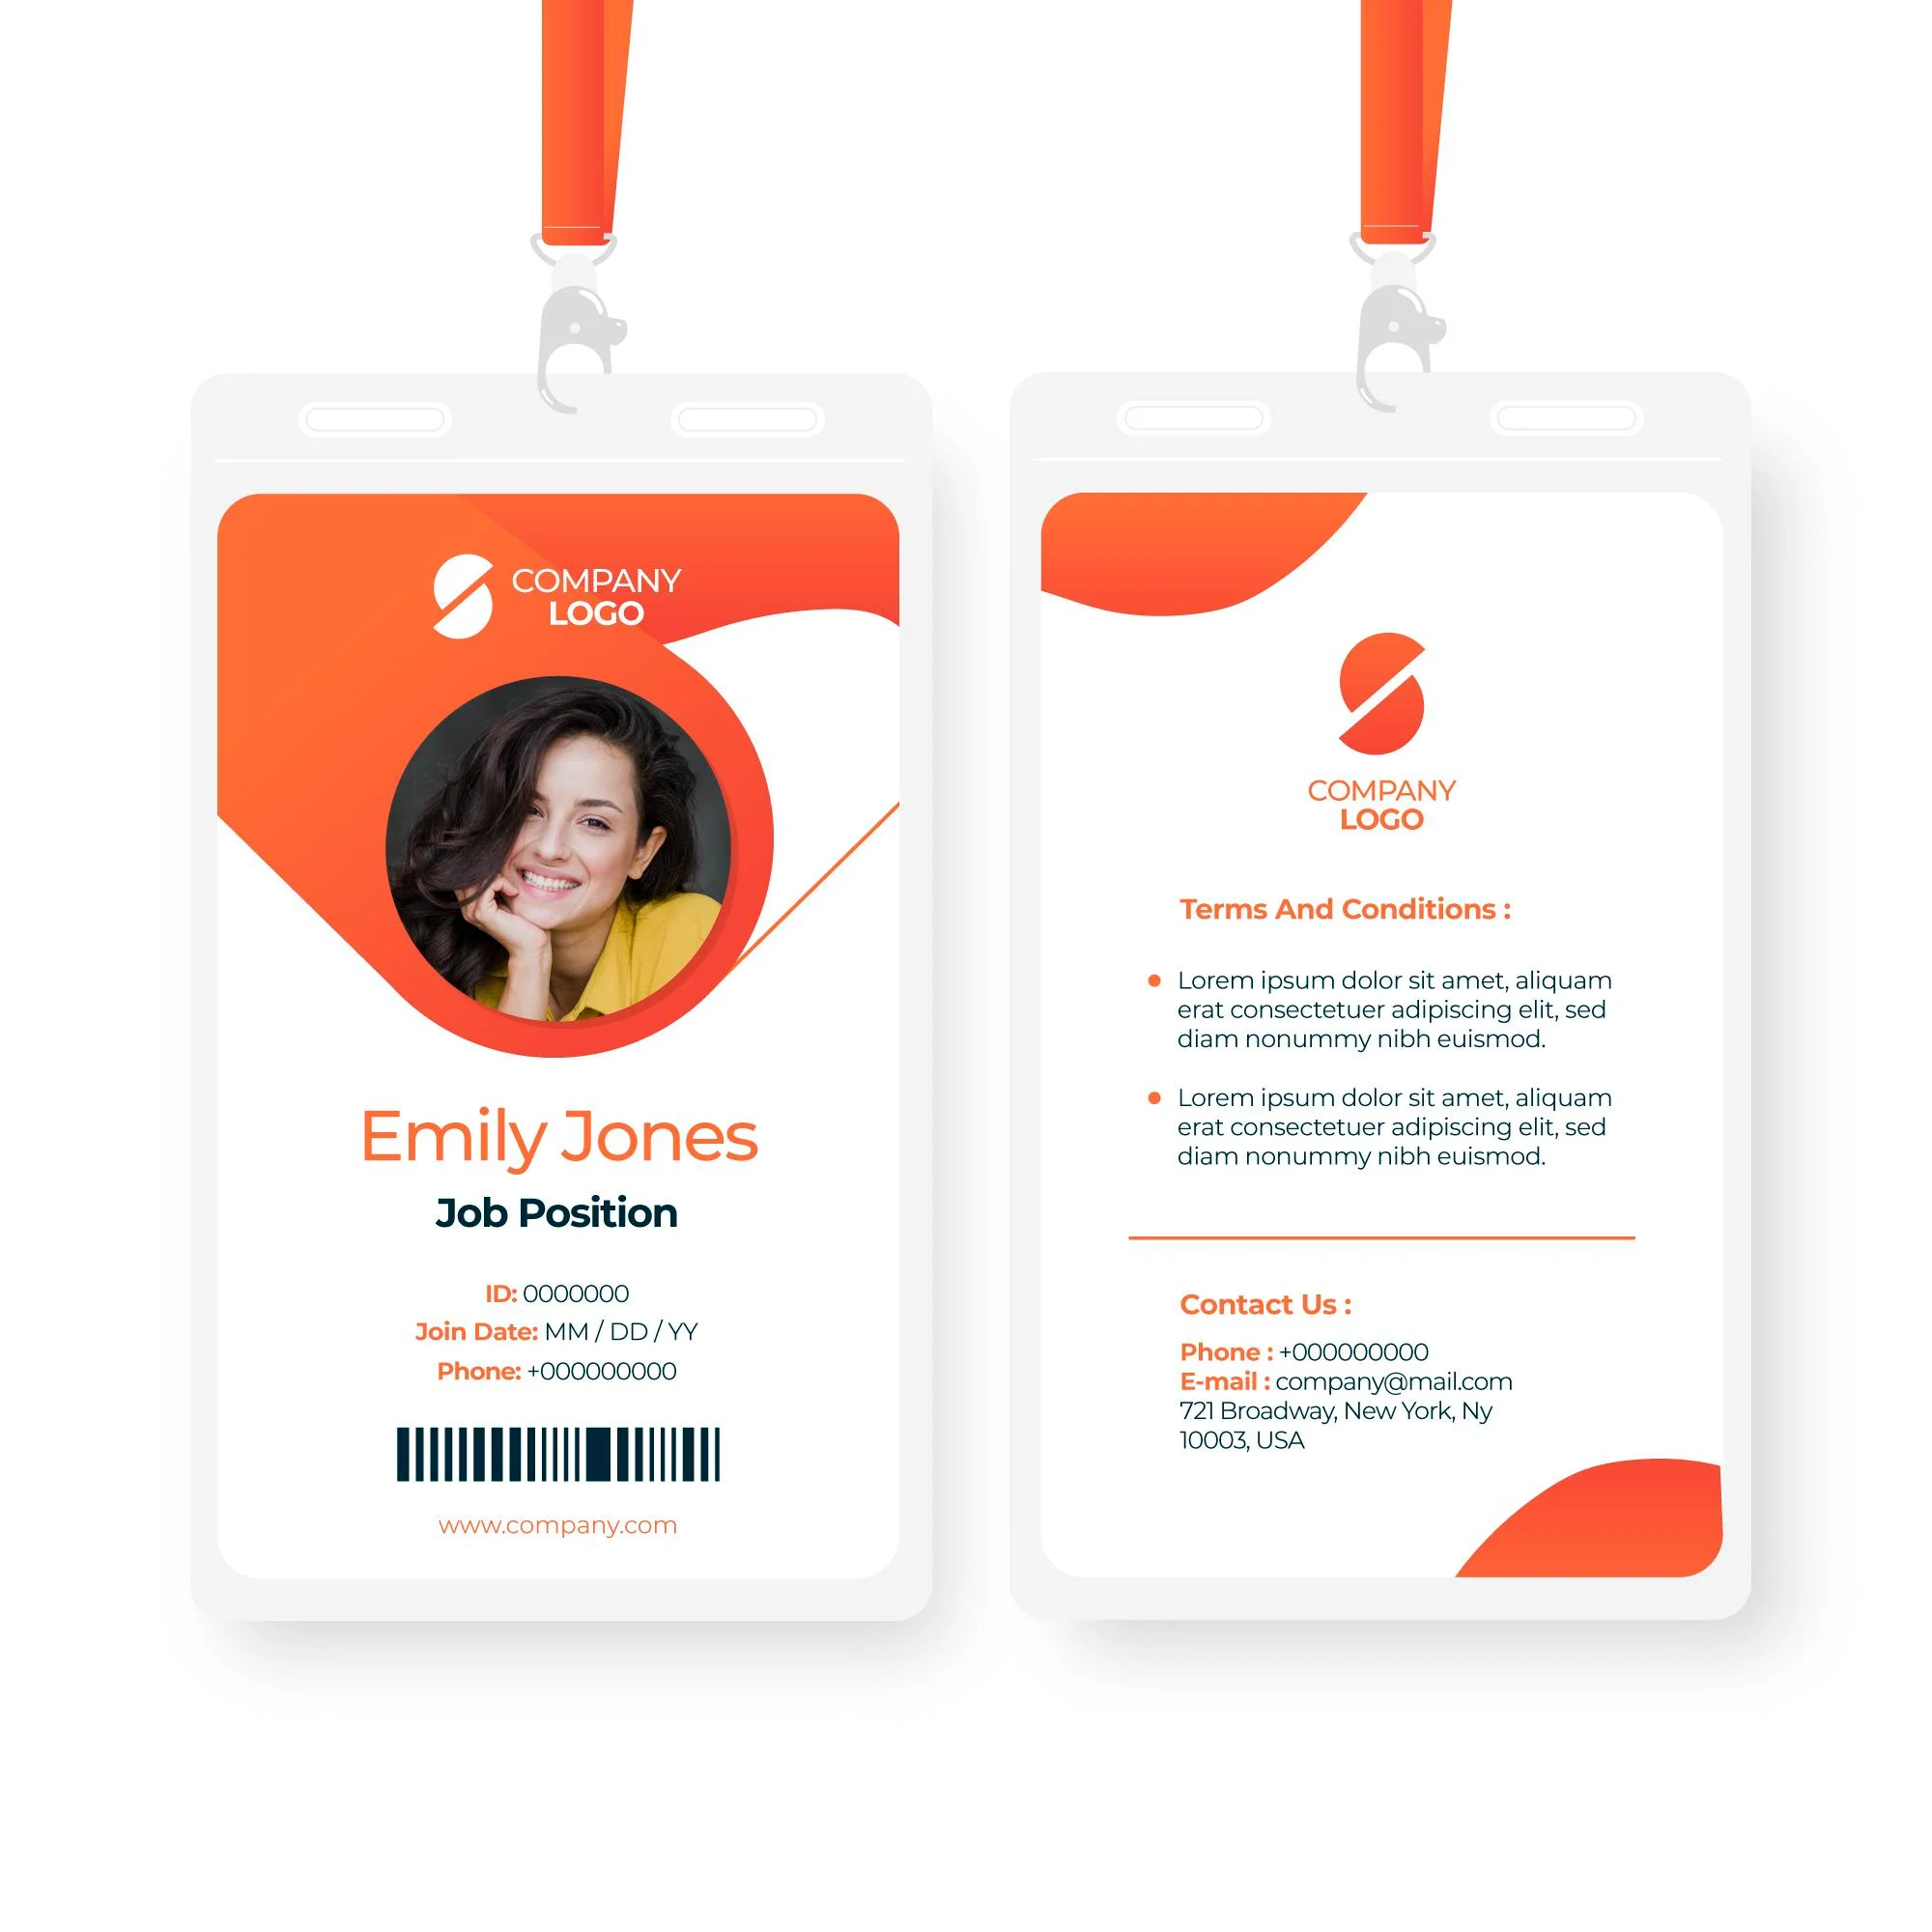 Need Employee ID Card Printing in Delhi? Look no further! We provide fast and reliable services for all your card printing needs. Order now!